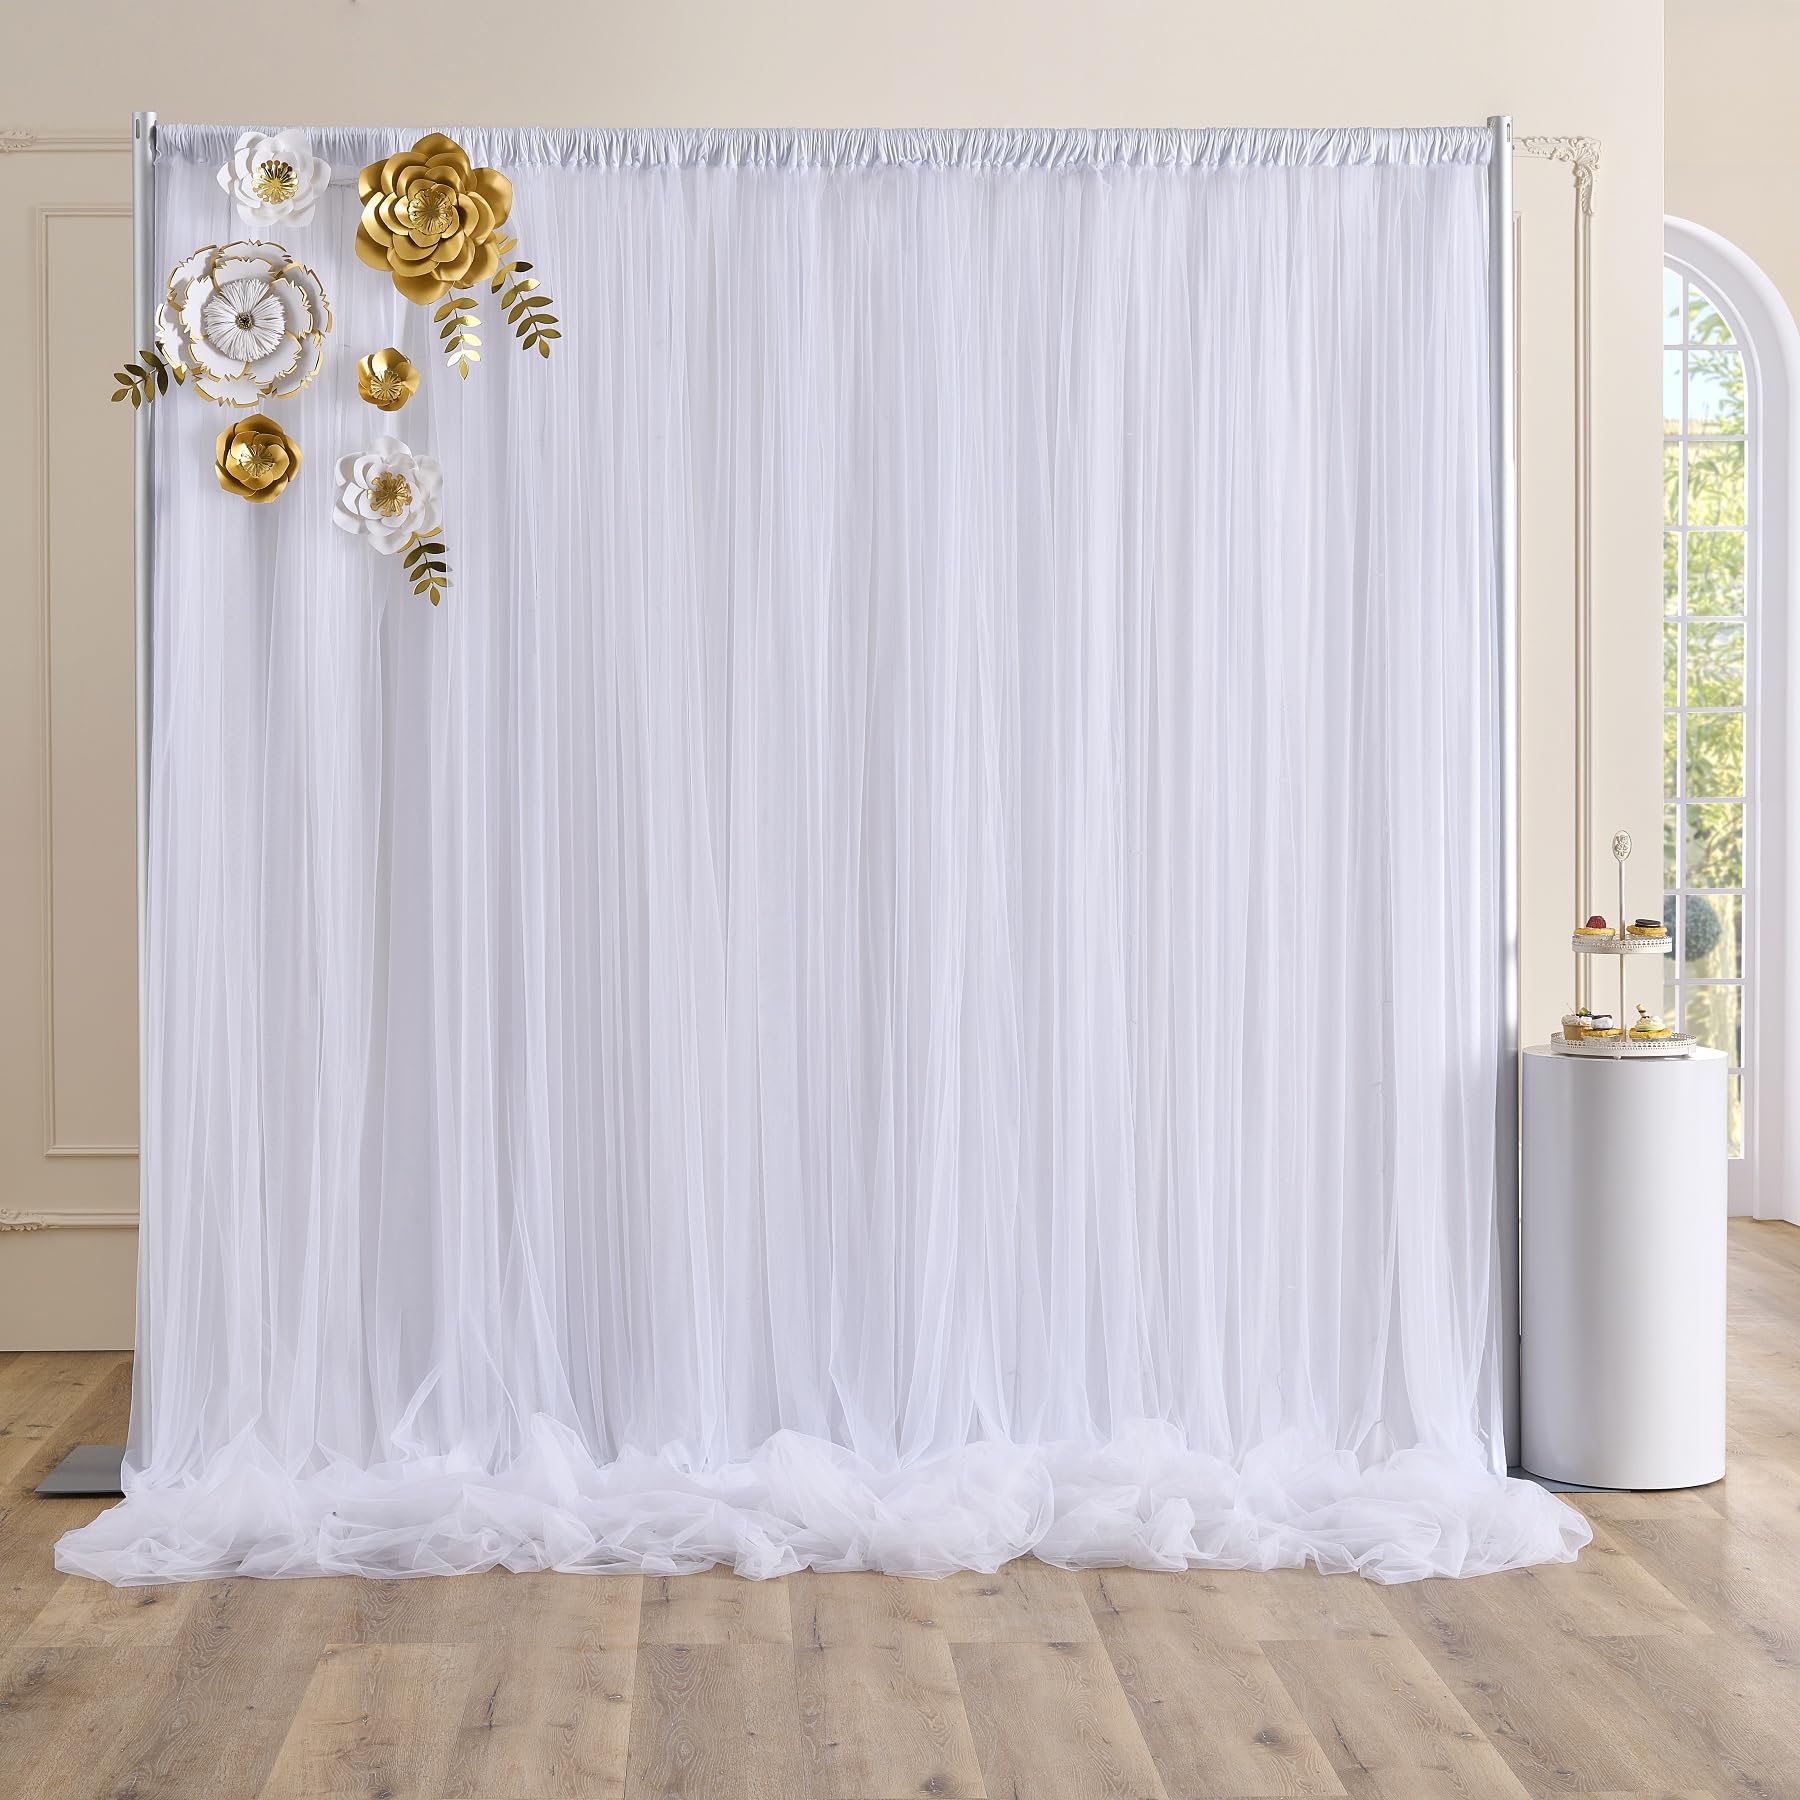 White Tulle Backdrop Curtains for Baby Shower Party Wedding Photo Drape Sheer Backdrop for Birthday Bridal Shower Photography Props 10 ft X 7 ft